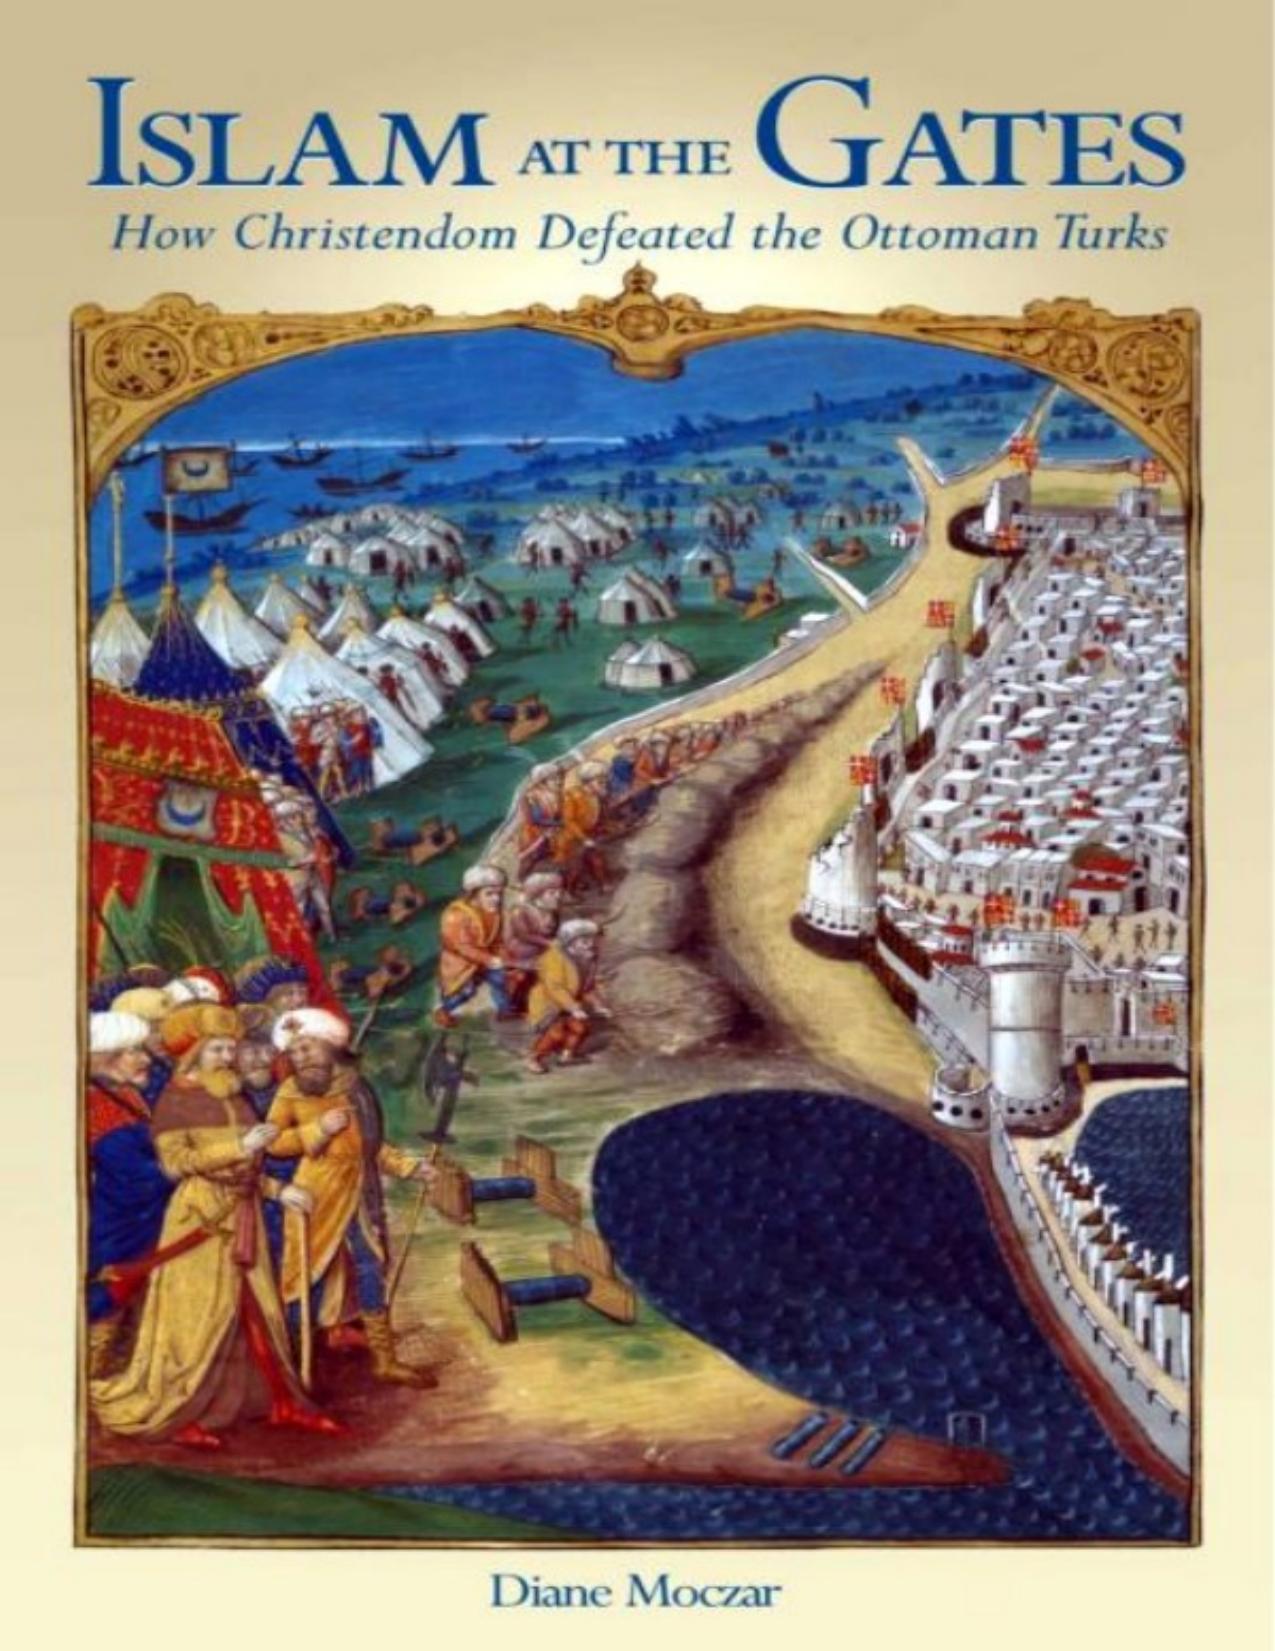 Islam At The Gates: How Christendom Defeated the Ottoman Turks by Diane Moczar